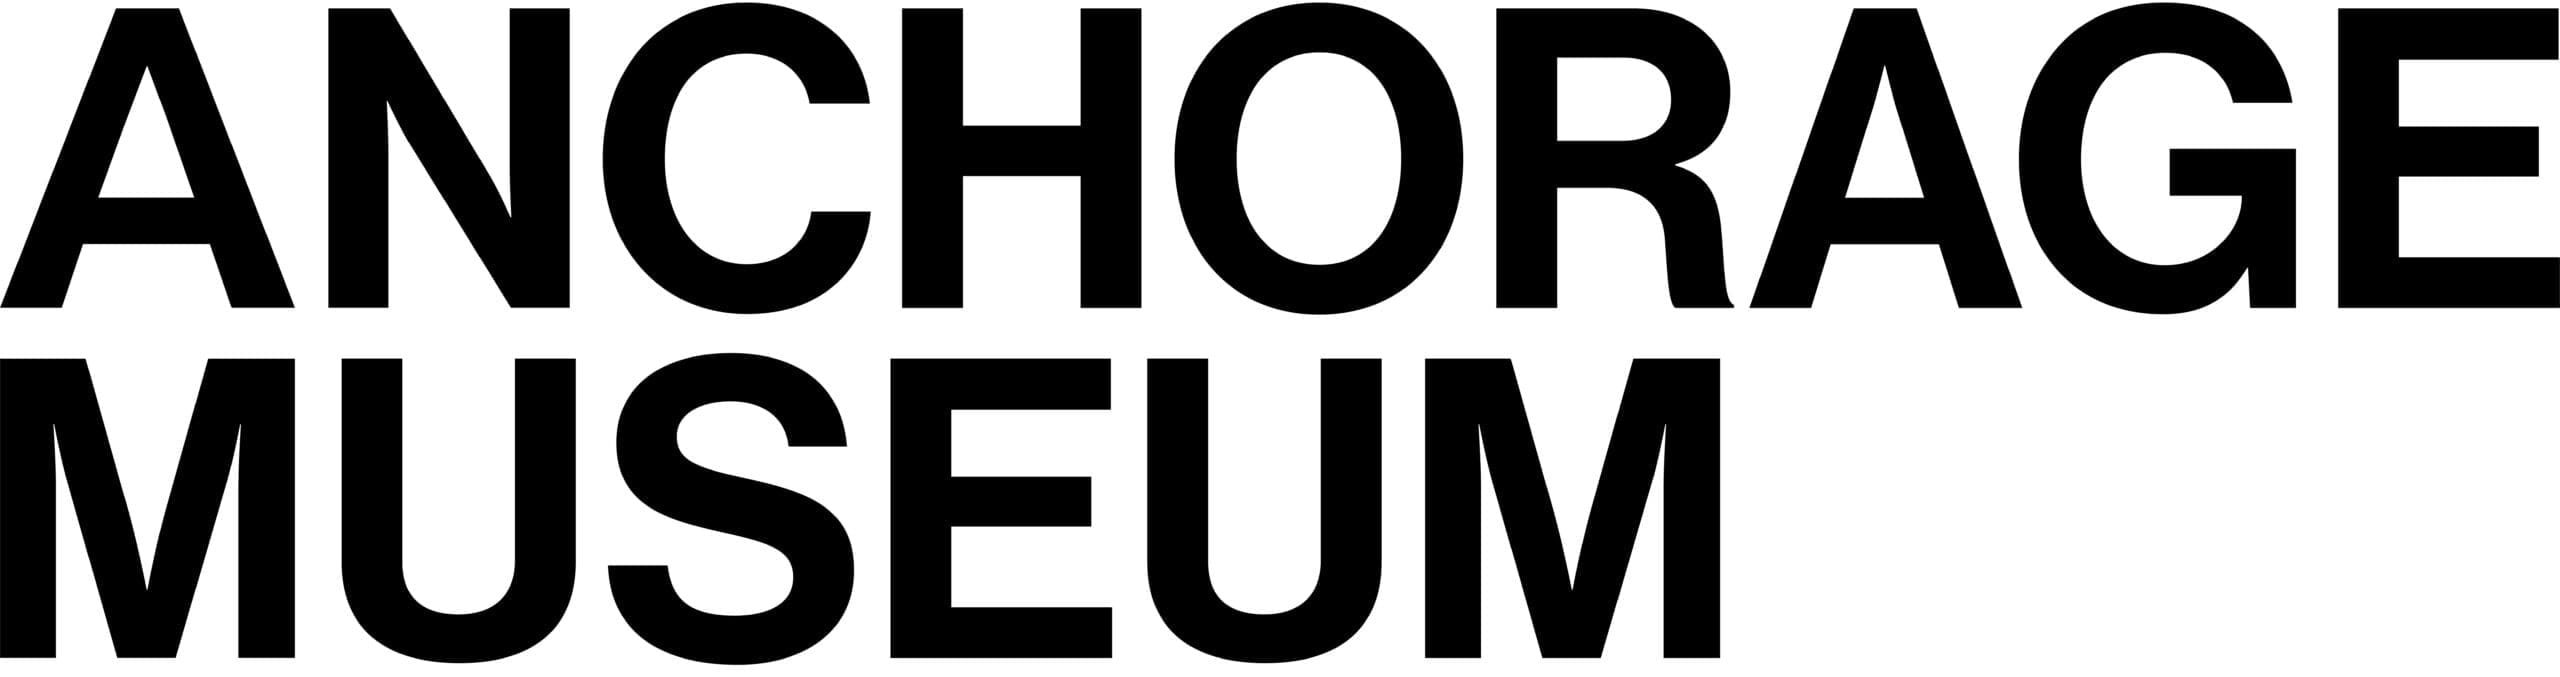 Anchorage Museum logo - The word Anchorage over the word Museum, all caps, sans serif, in black, and left justified